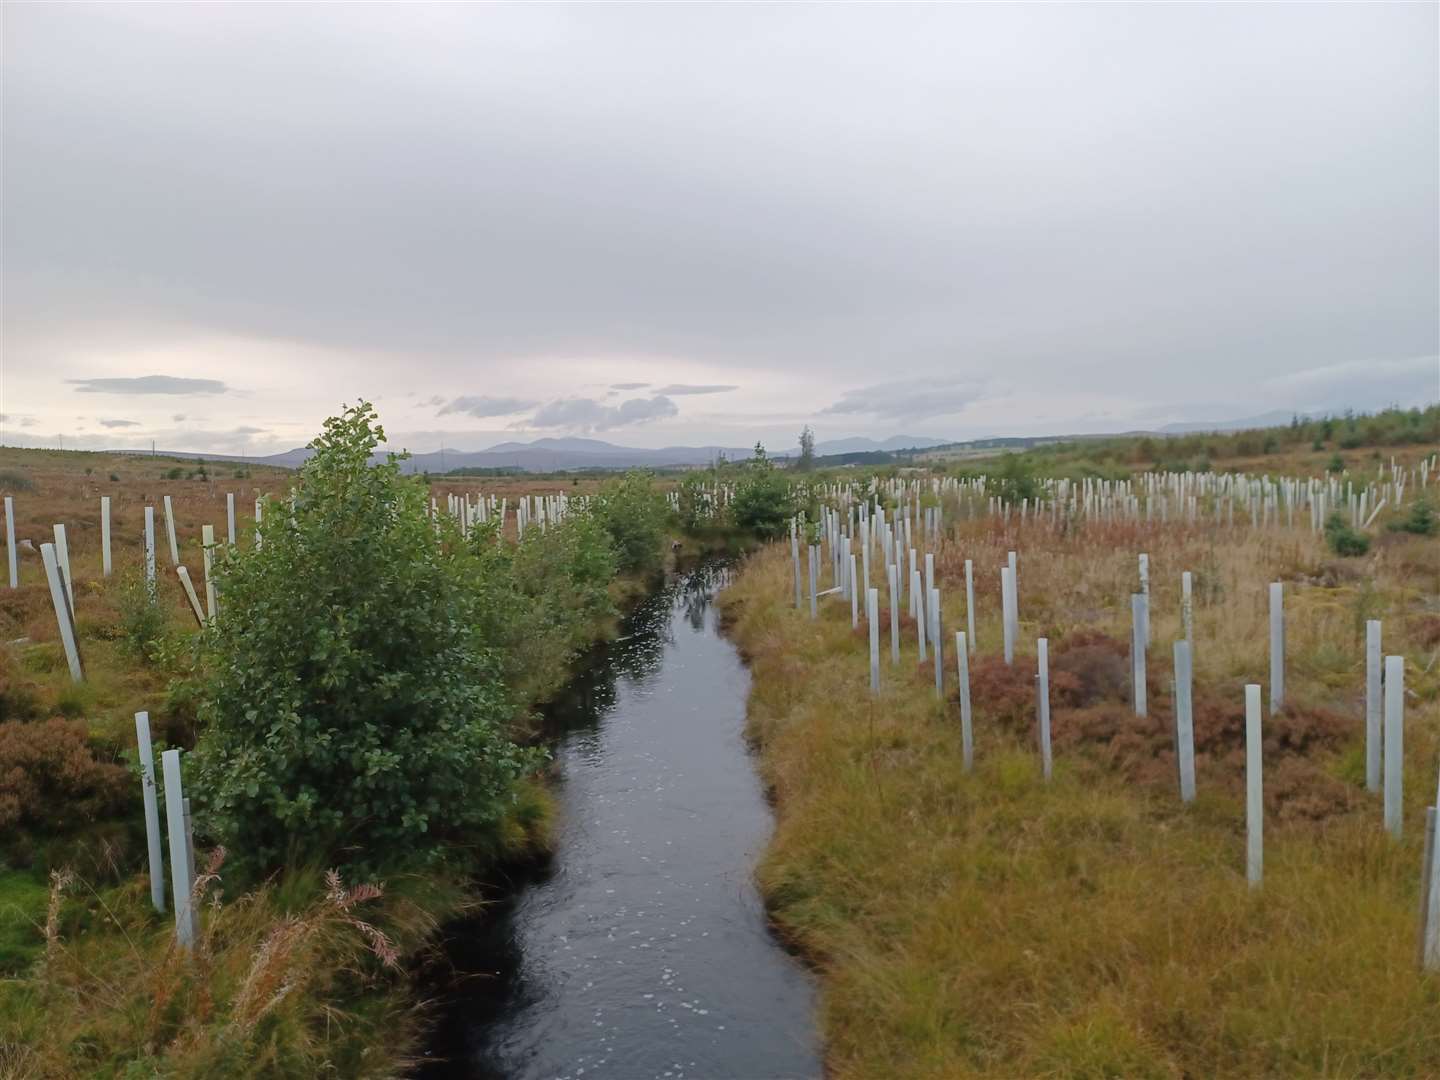 Riparian planting in the far north is helping to protect watercourses and improve habitats.